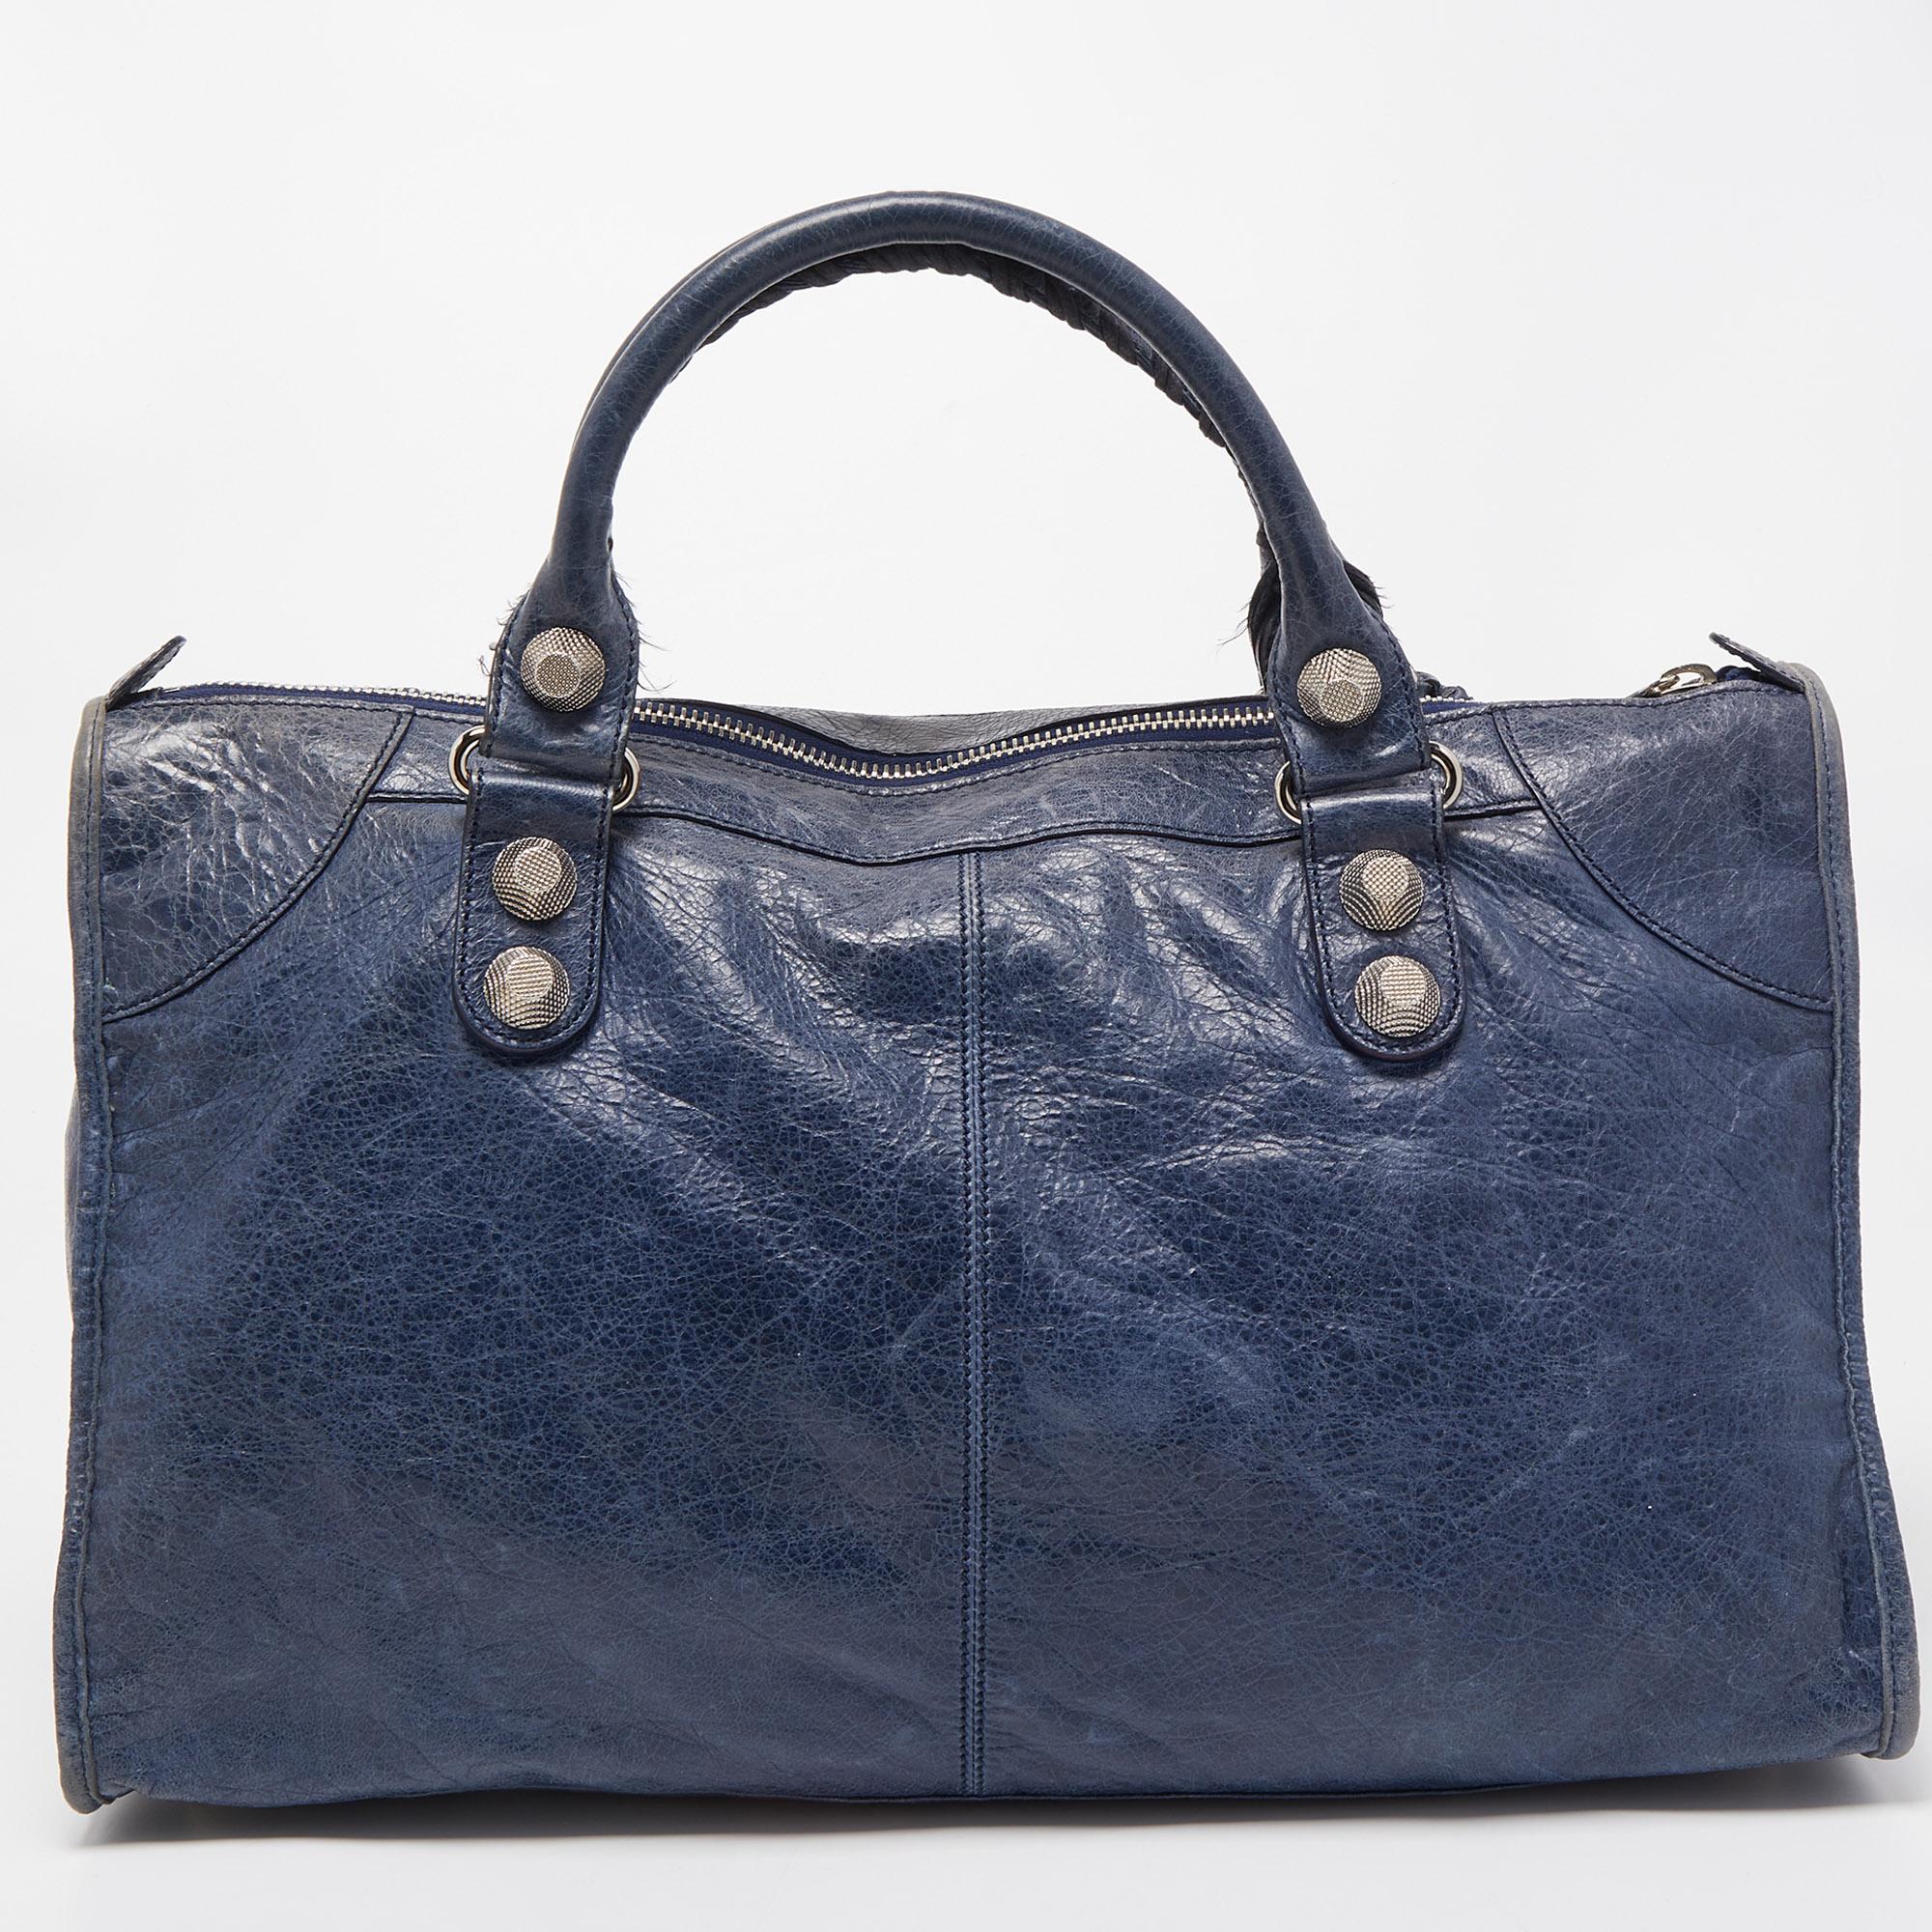 Displaying exquisite craftsmanship, this fabulous bag will certainly live up to your expectations. Featuring a chic design, it is made from luxe materials and has a roomy interior for carrying your essentials.

Includes: Original Dustbag, Pocket